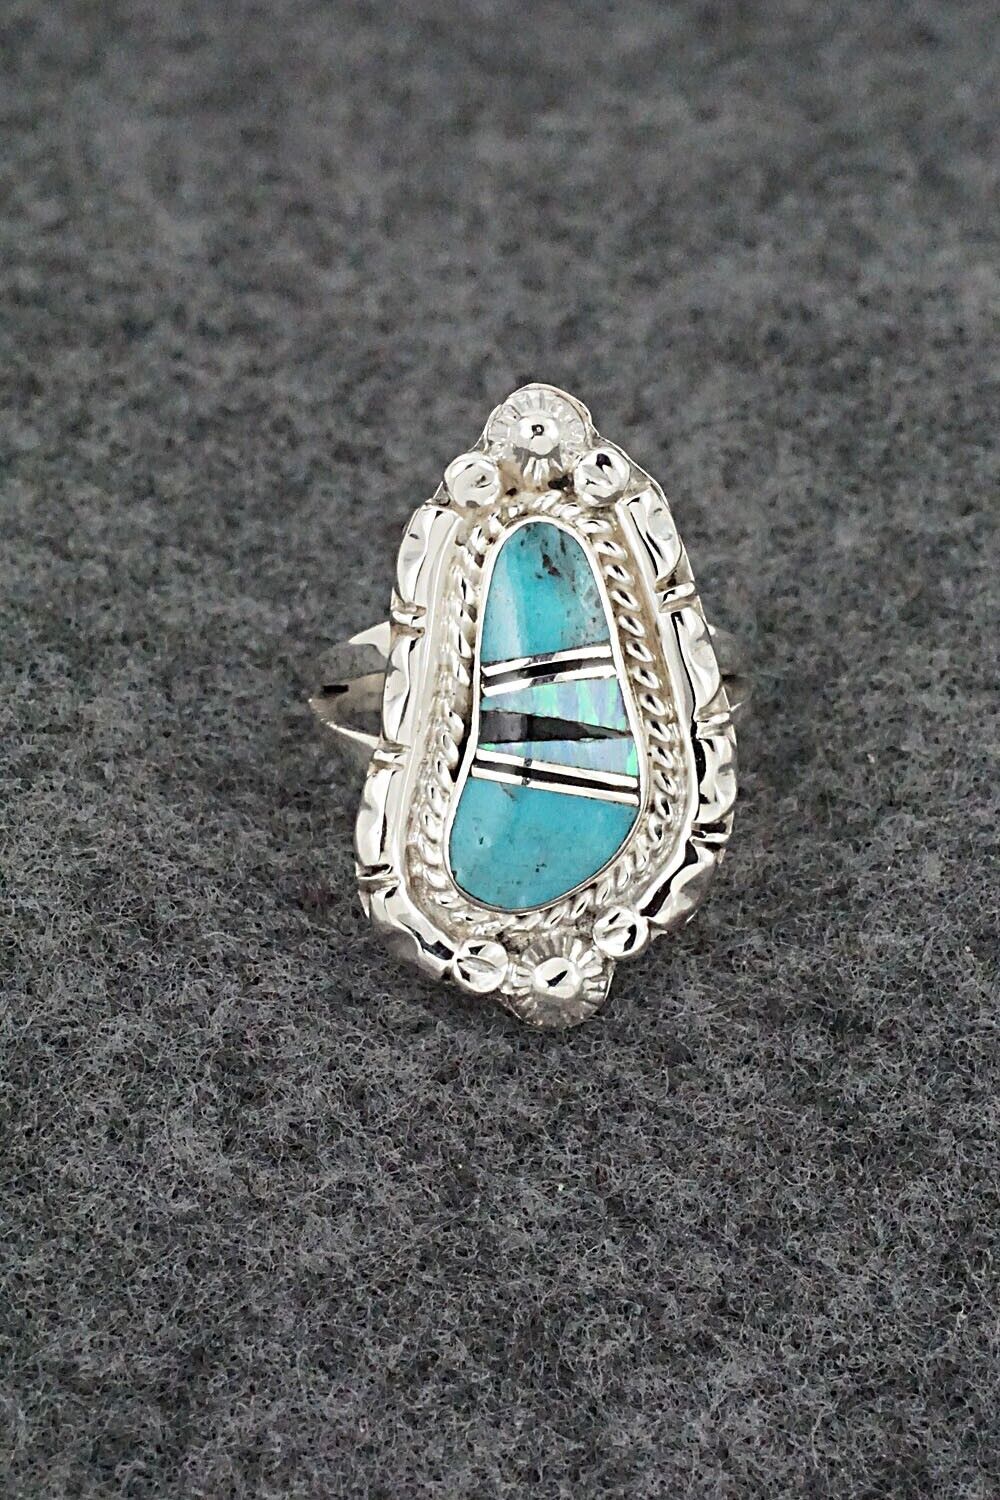 Turquoise, Onyx, Opalite & Sterling Silver Ring - James Manygoats - Size 6.25